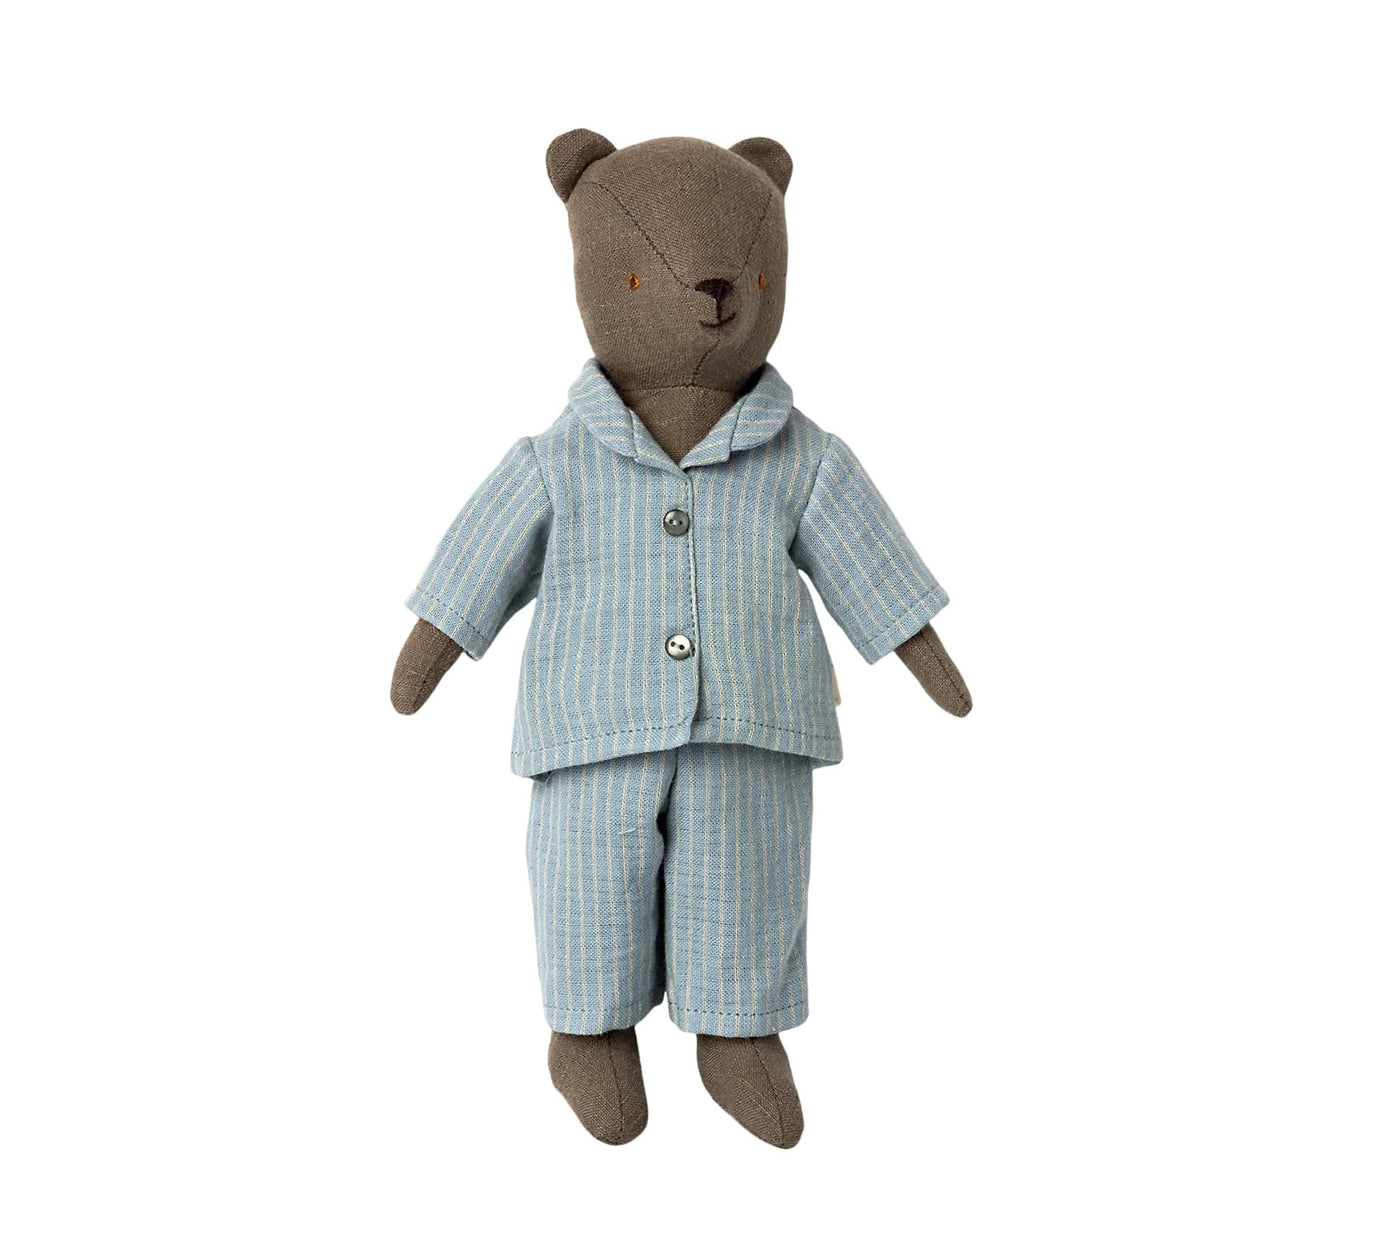 Teddy Dad sold separately